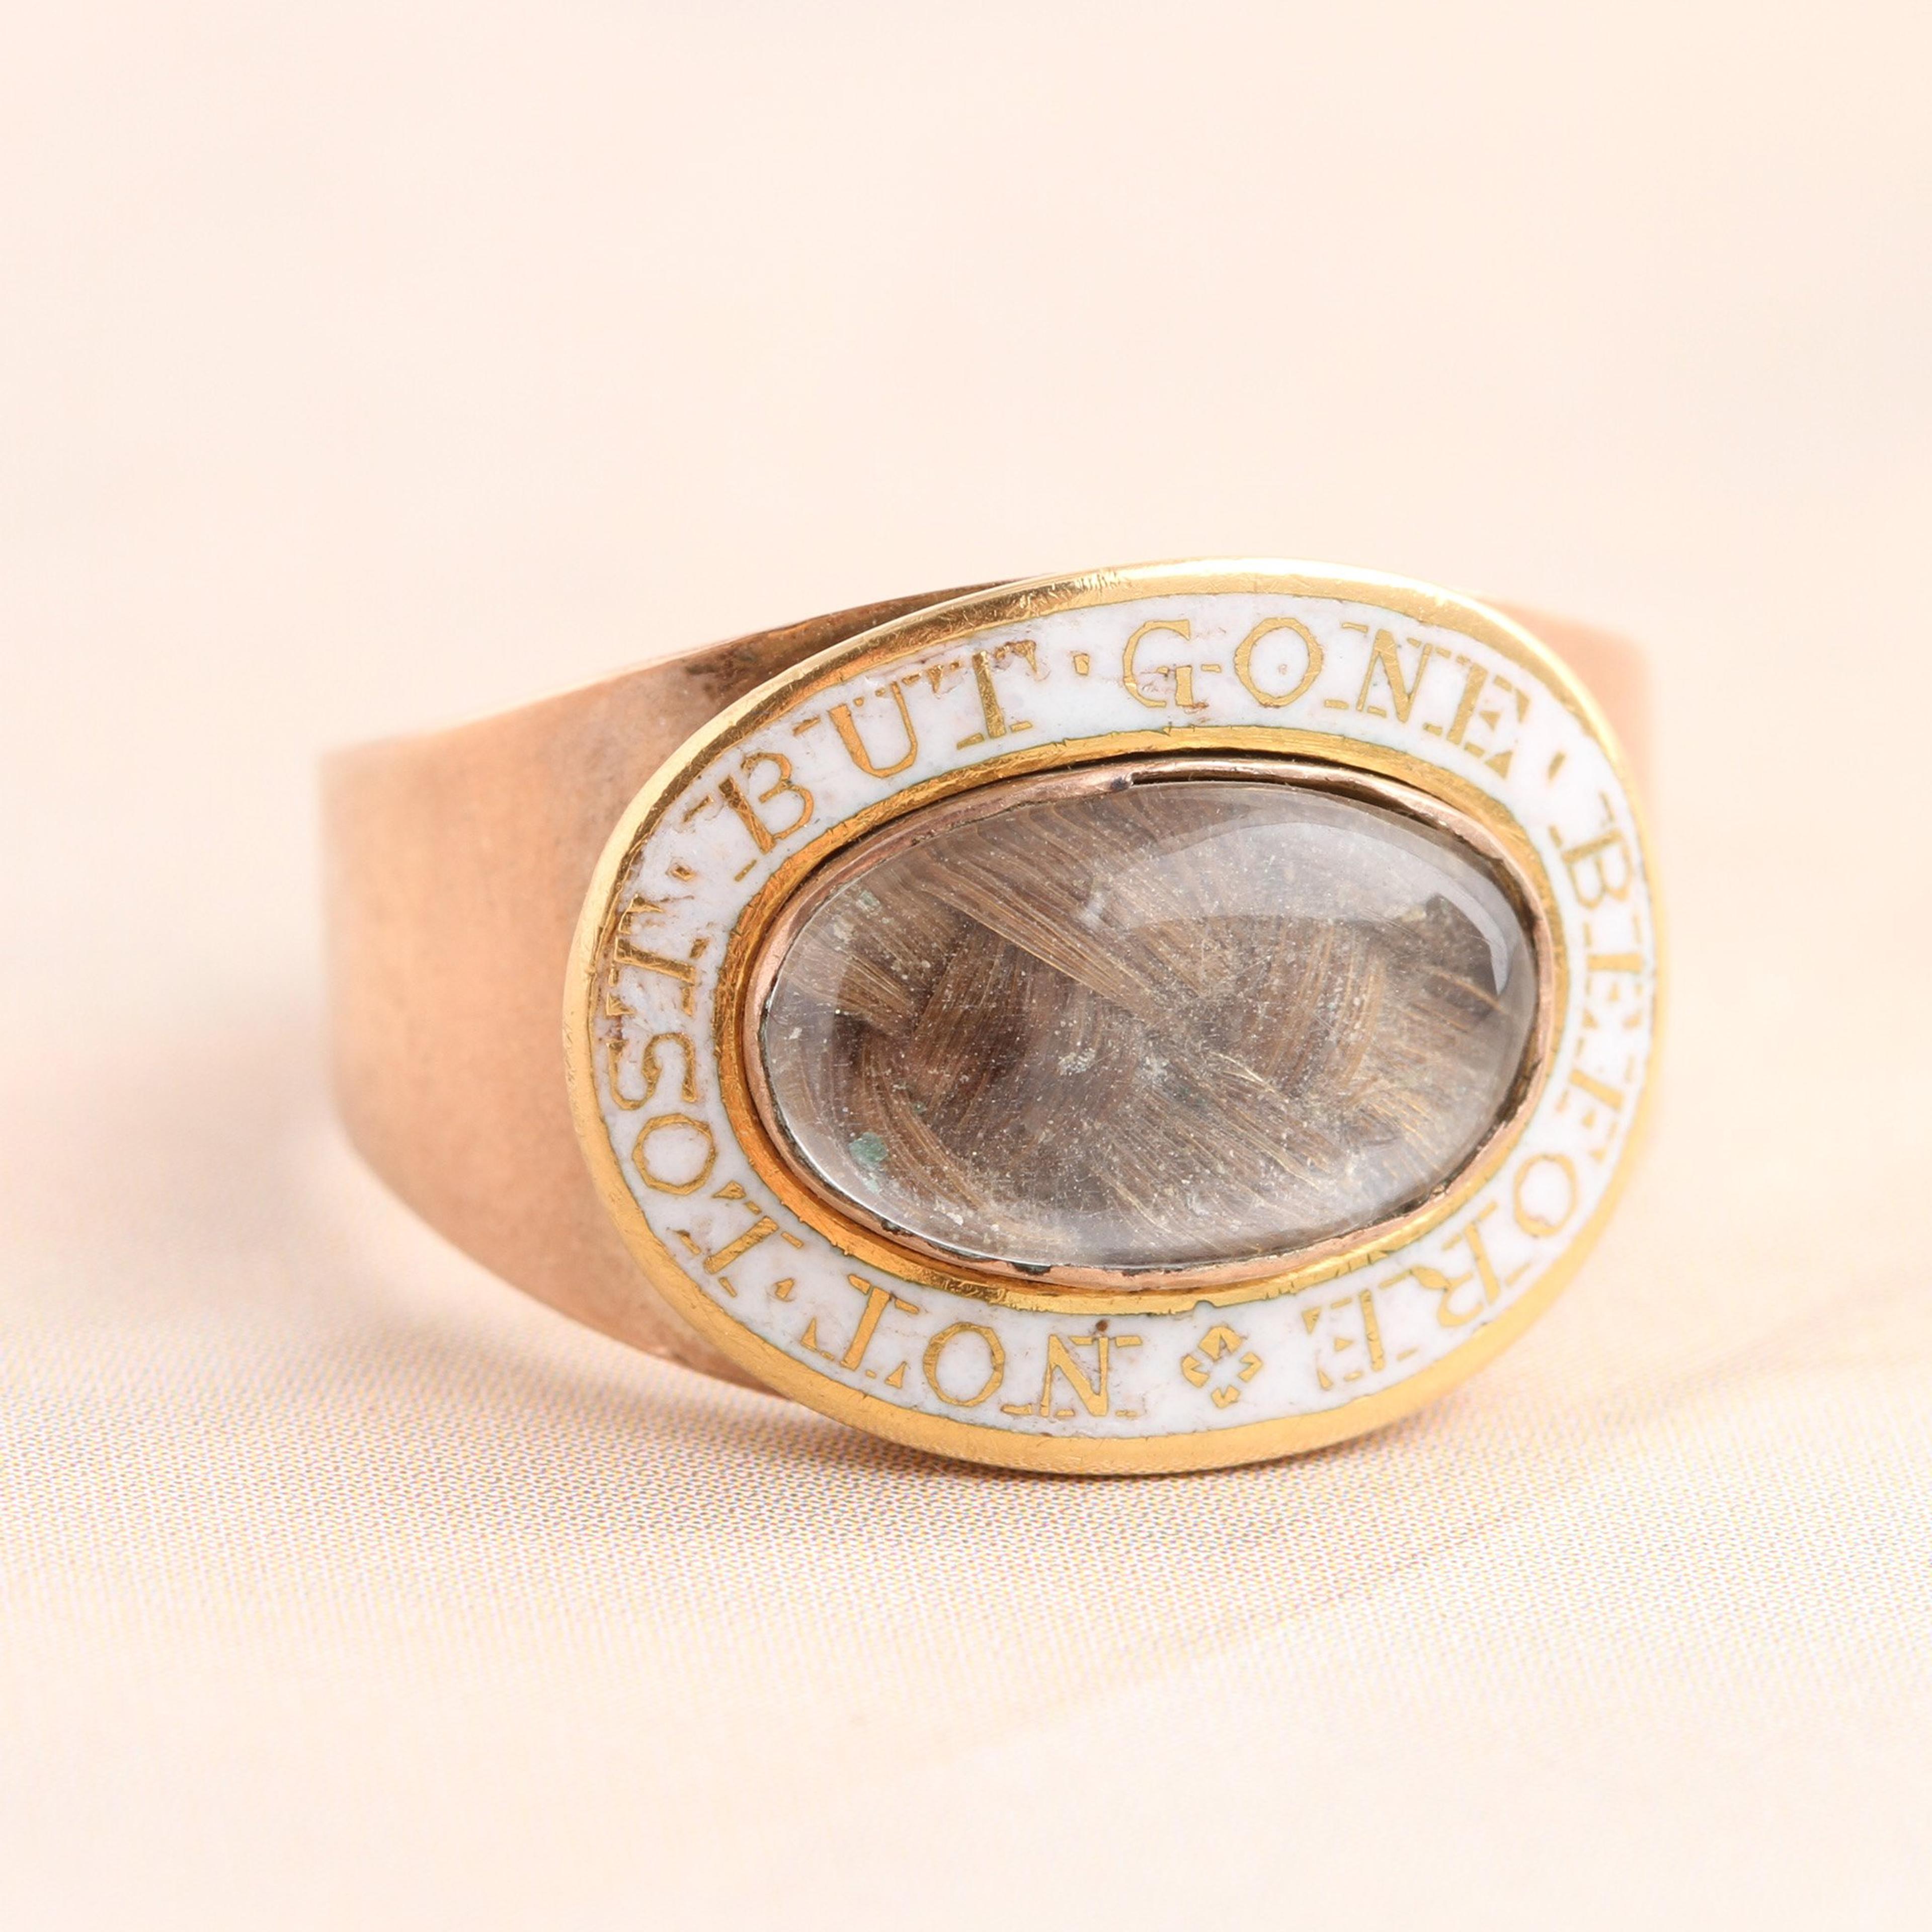 "Not Lost But Gone Before" White Enamel Mourning Ring